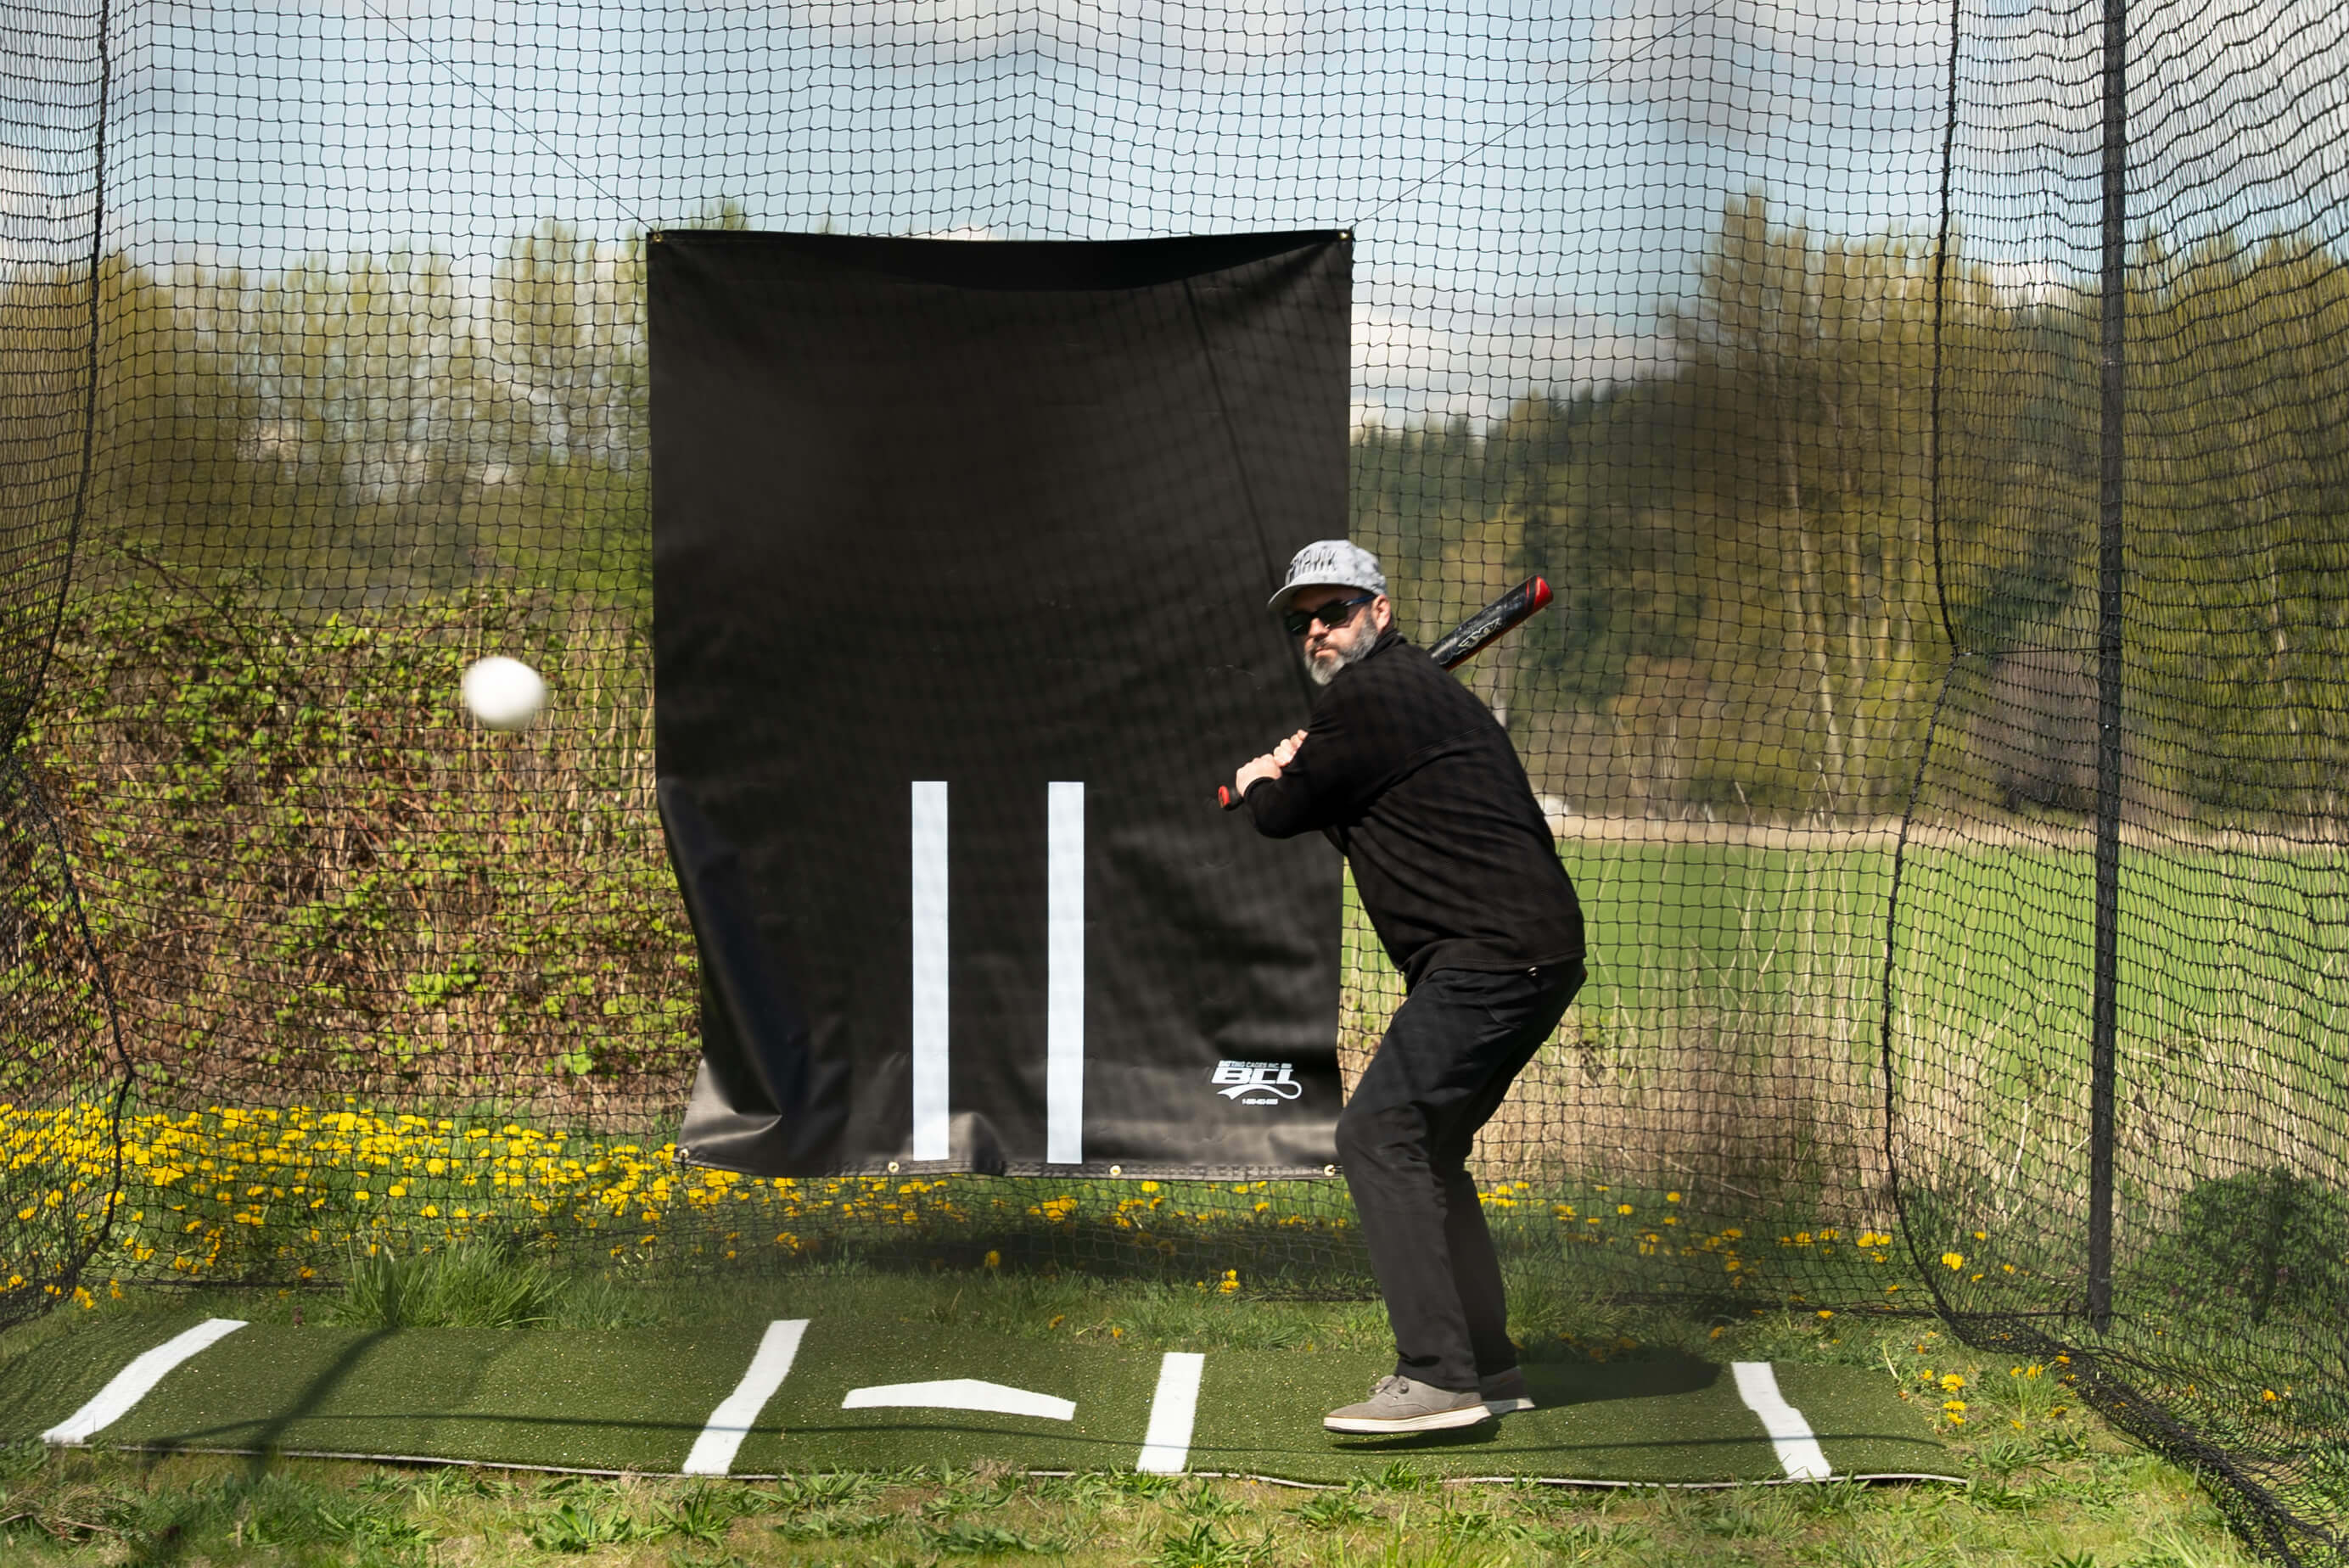 Man batting while standing on a batters box mat and in front of a vinyl backdrop while in the batting cage